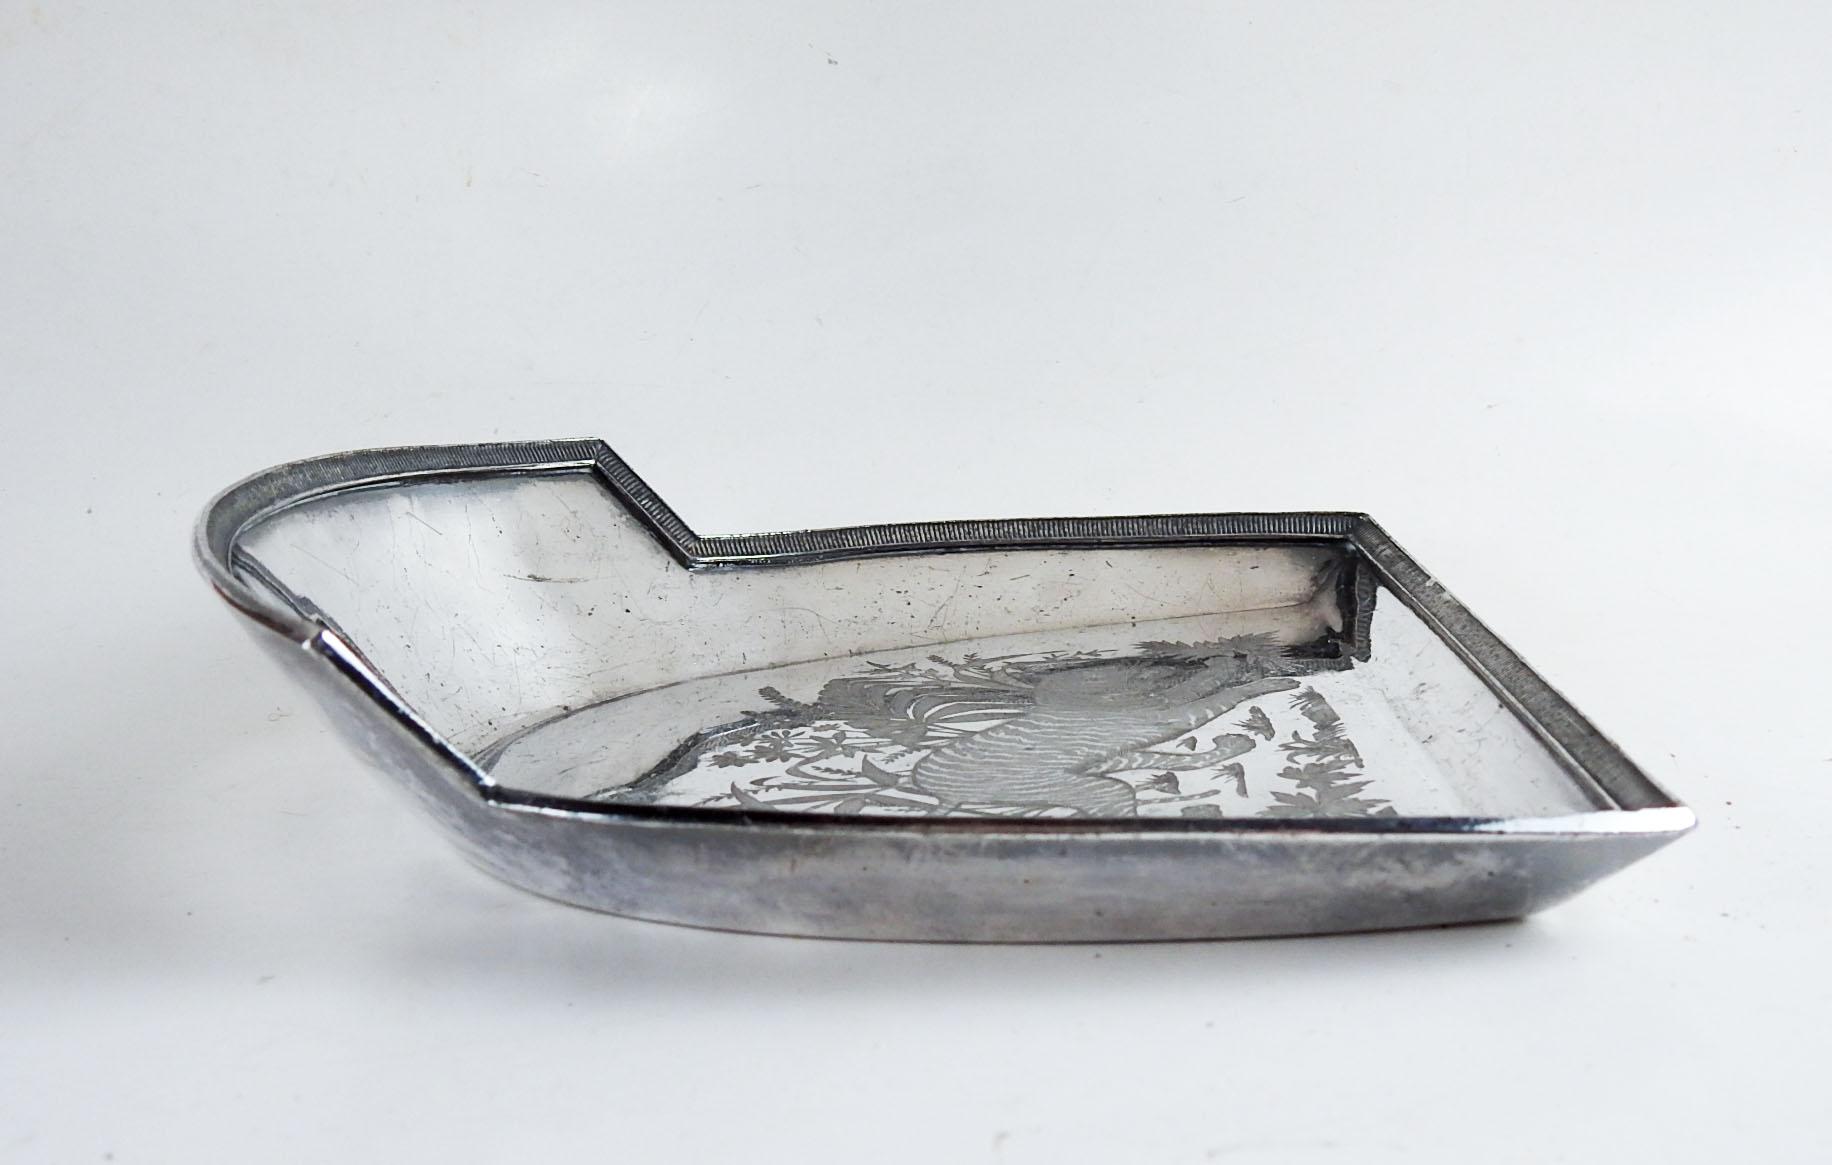 Antique Silverplate Aesthetic Tiger Tray In Good Condition For Sale In Seguin, TX